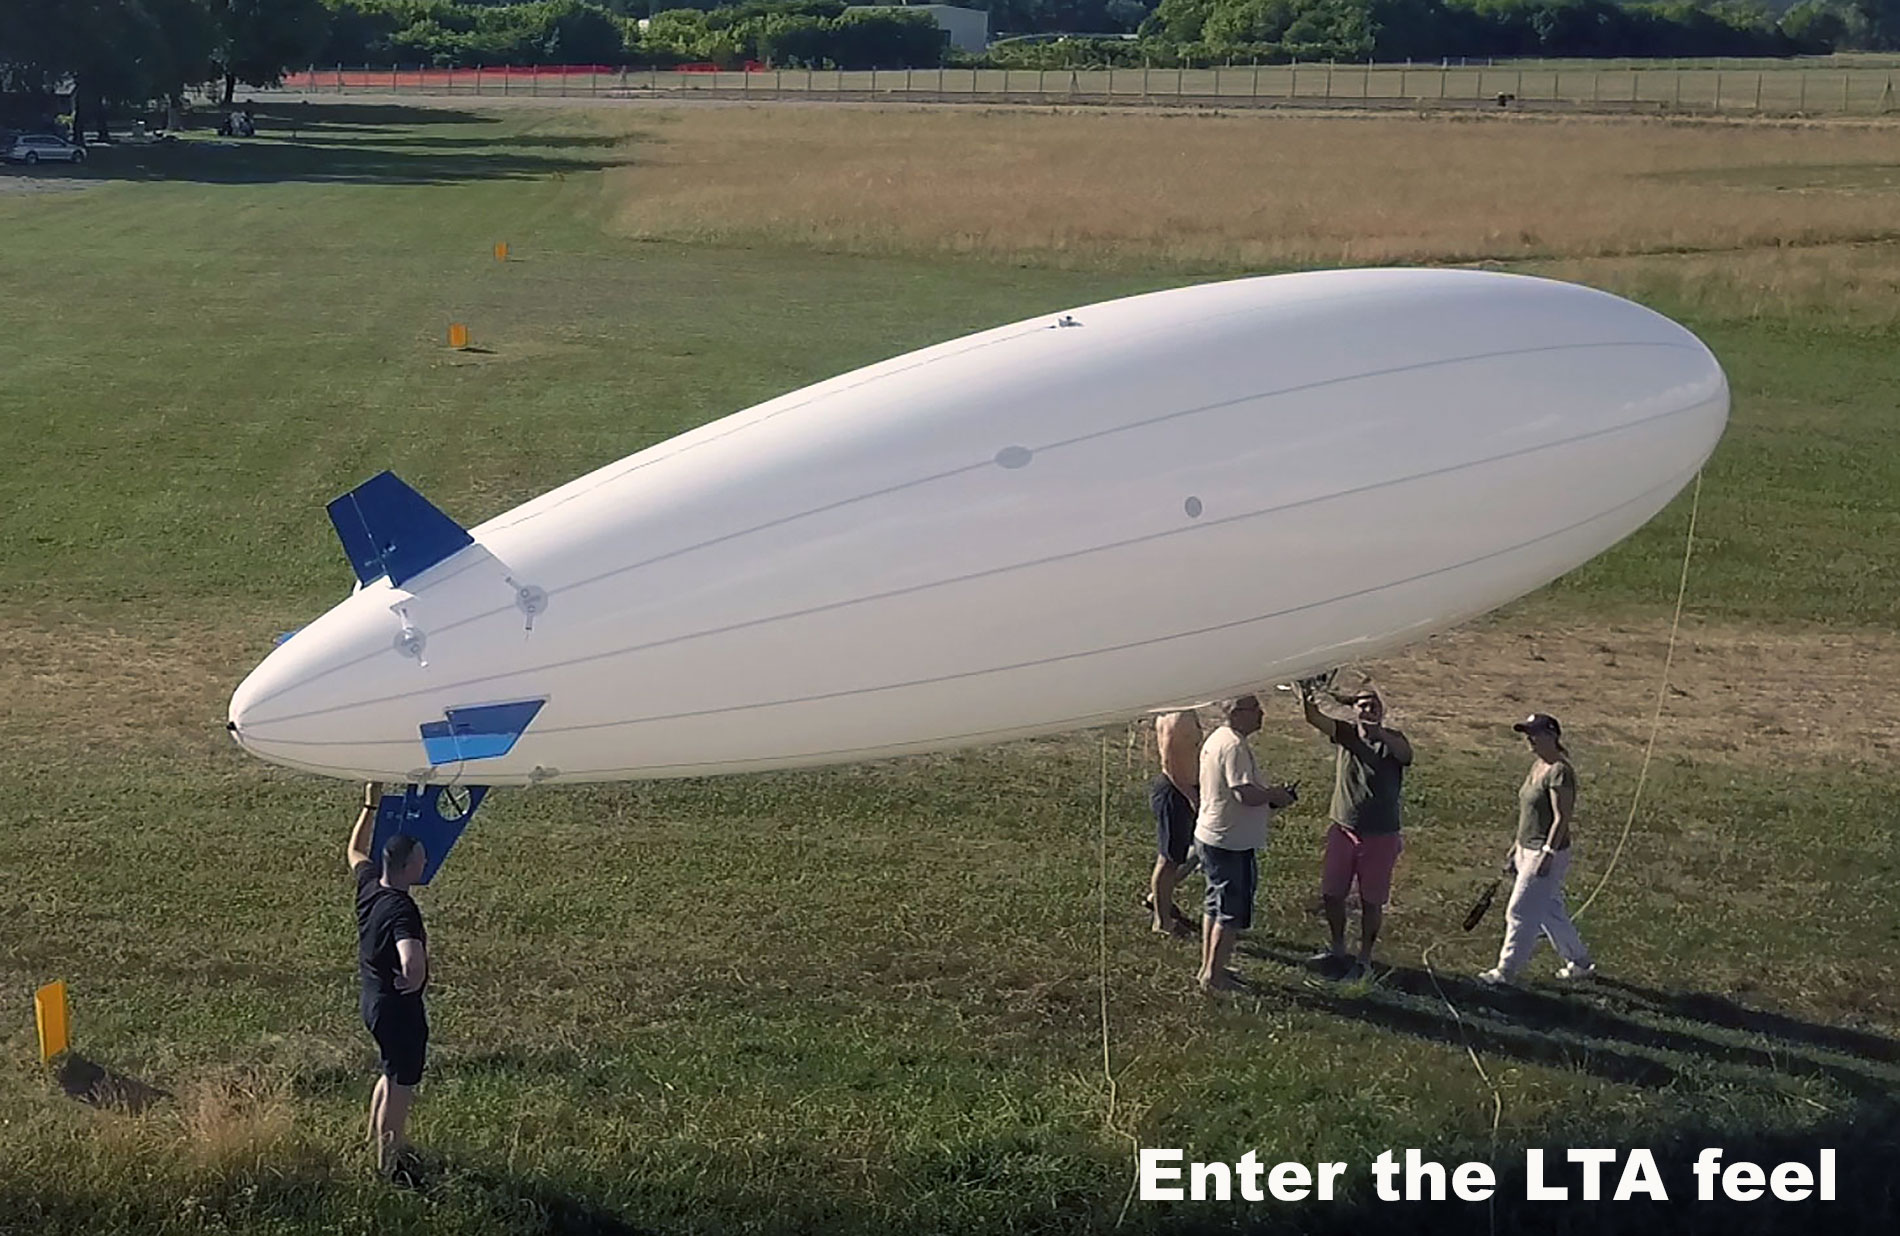 Enter-the-LTA-feel-with-a-10-m-RC-Blimp